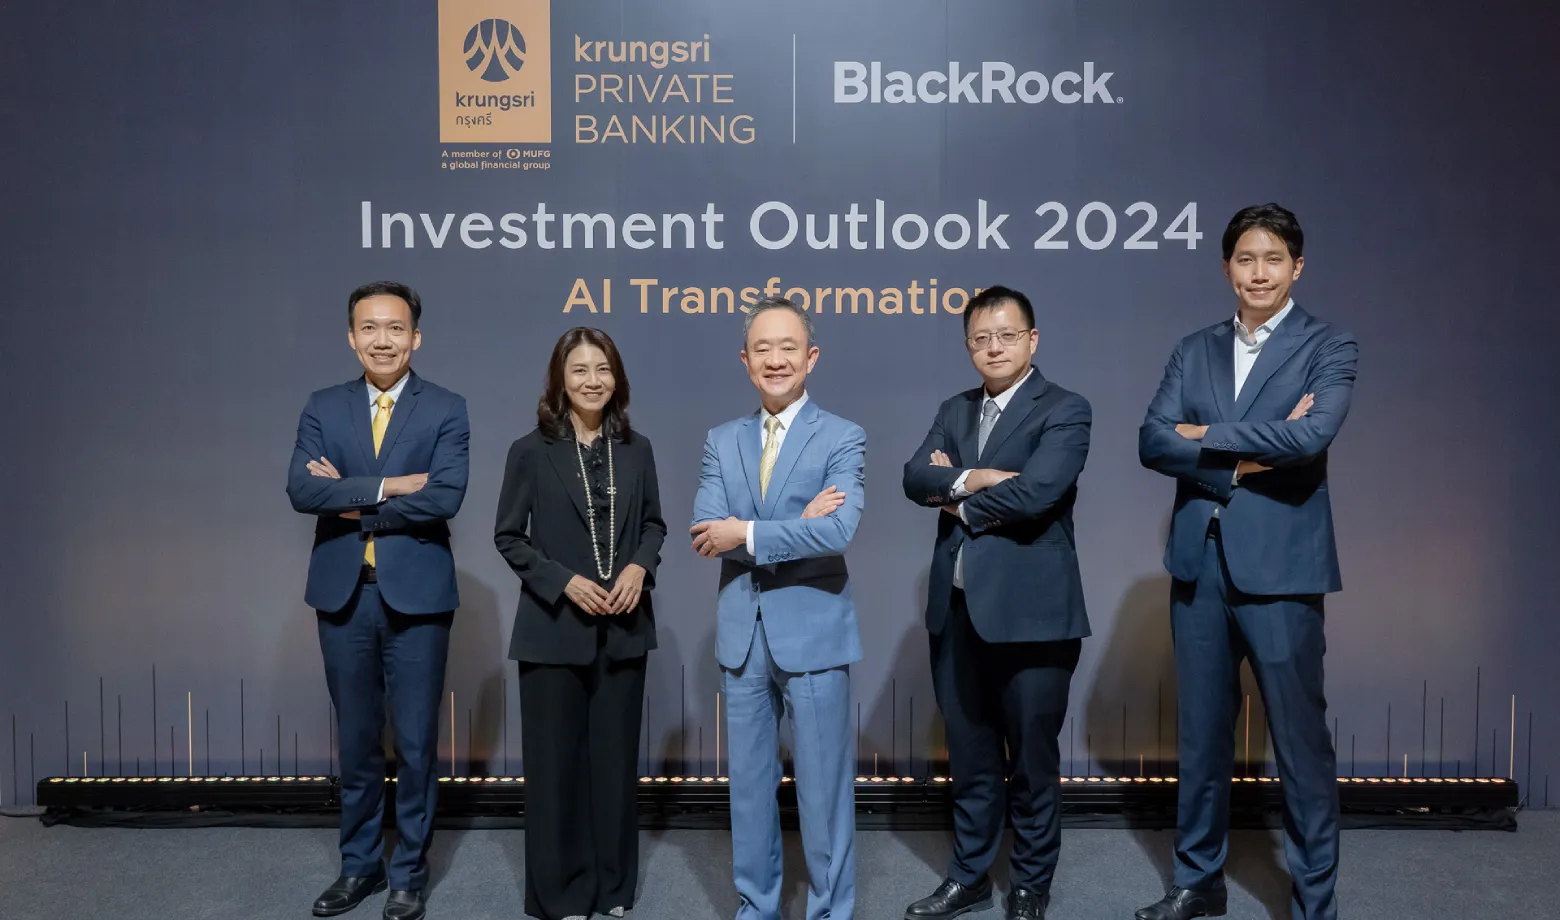 Krungsri Private Banking Investment Outlook 2024: AI Transformation